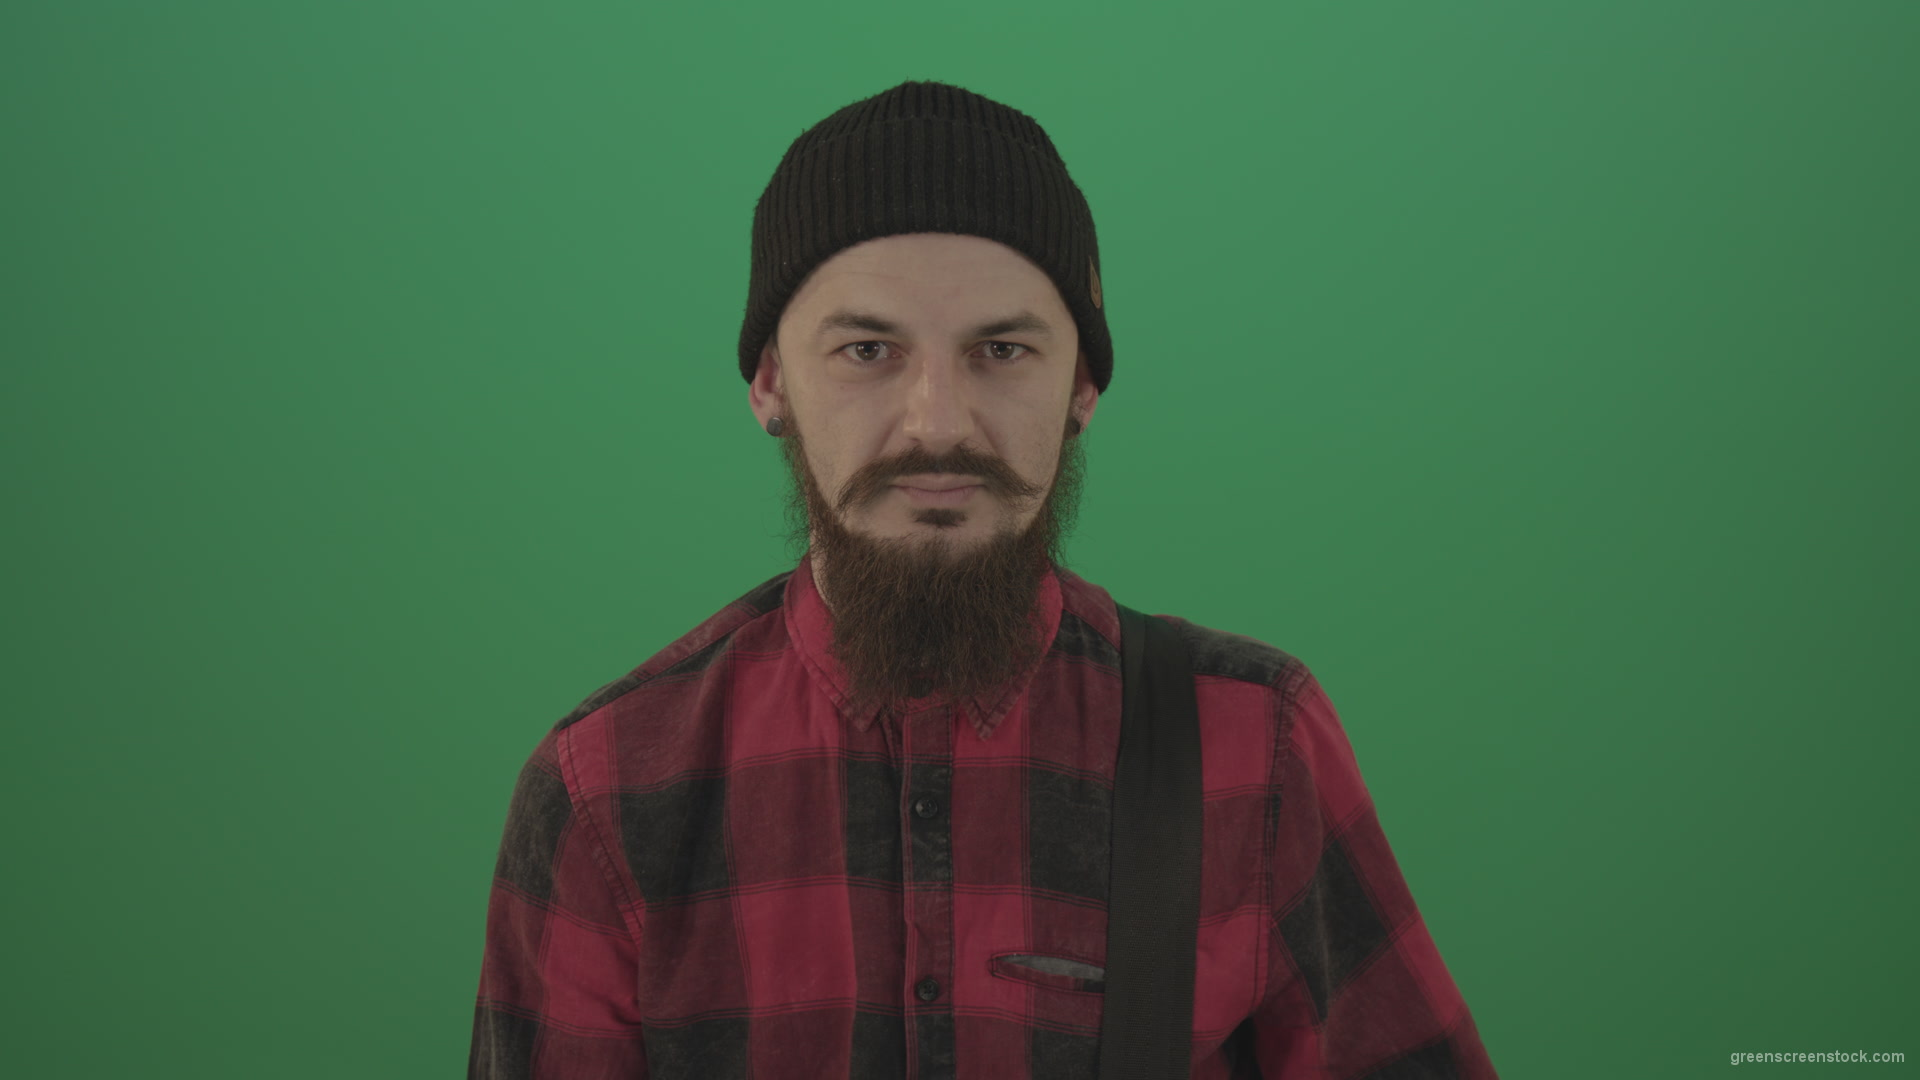 Punk-rocker-man-with-beard-and-red-shirt-screaming-feels-pain-isolated-on-green-screen-background_001 Green Screen Stock